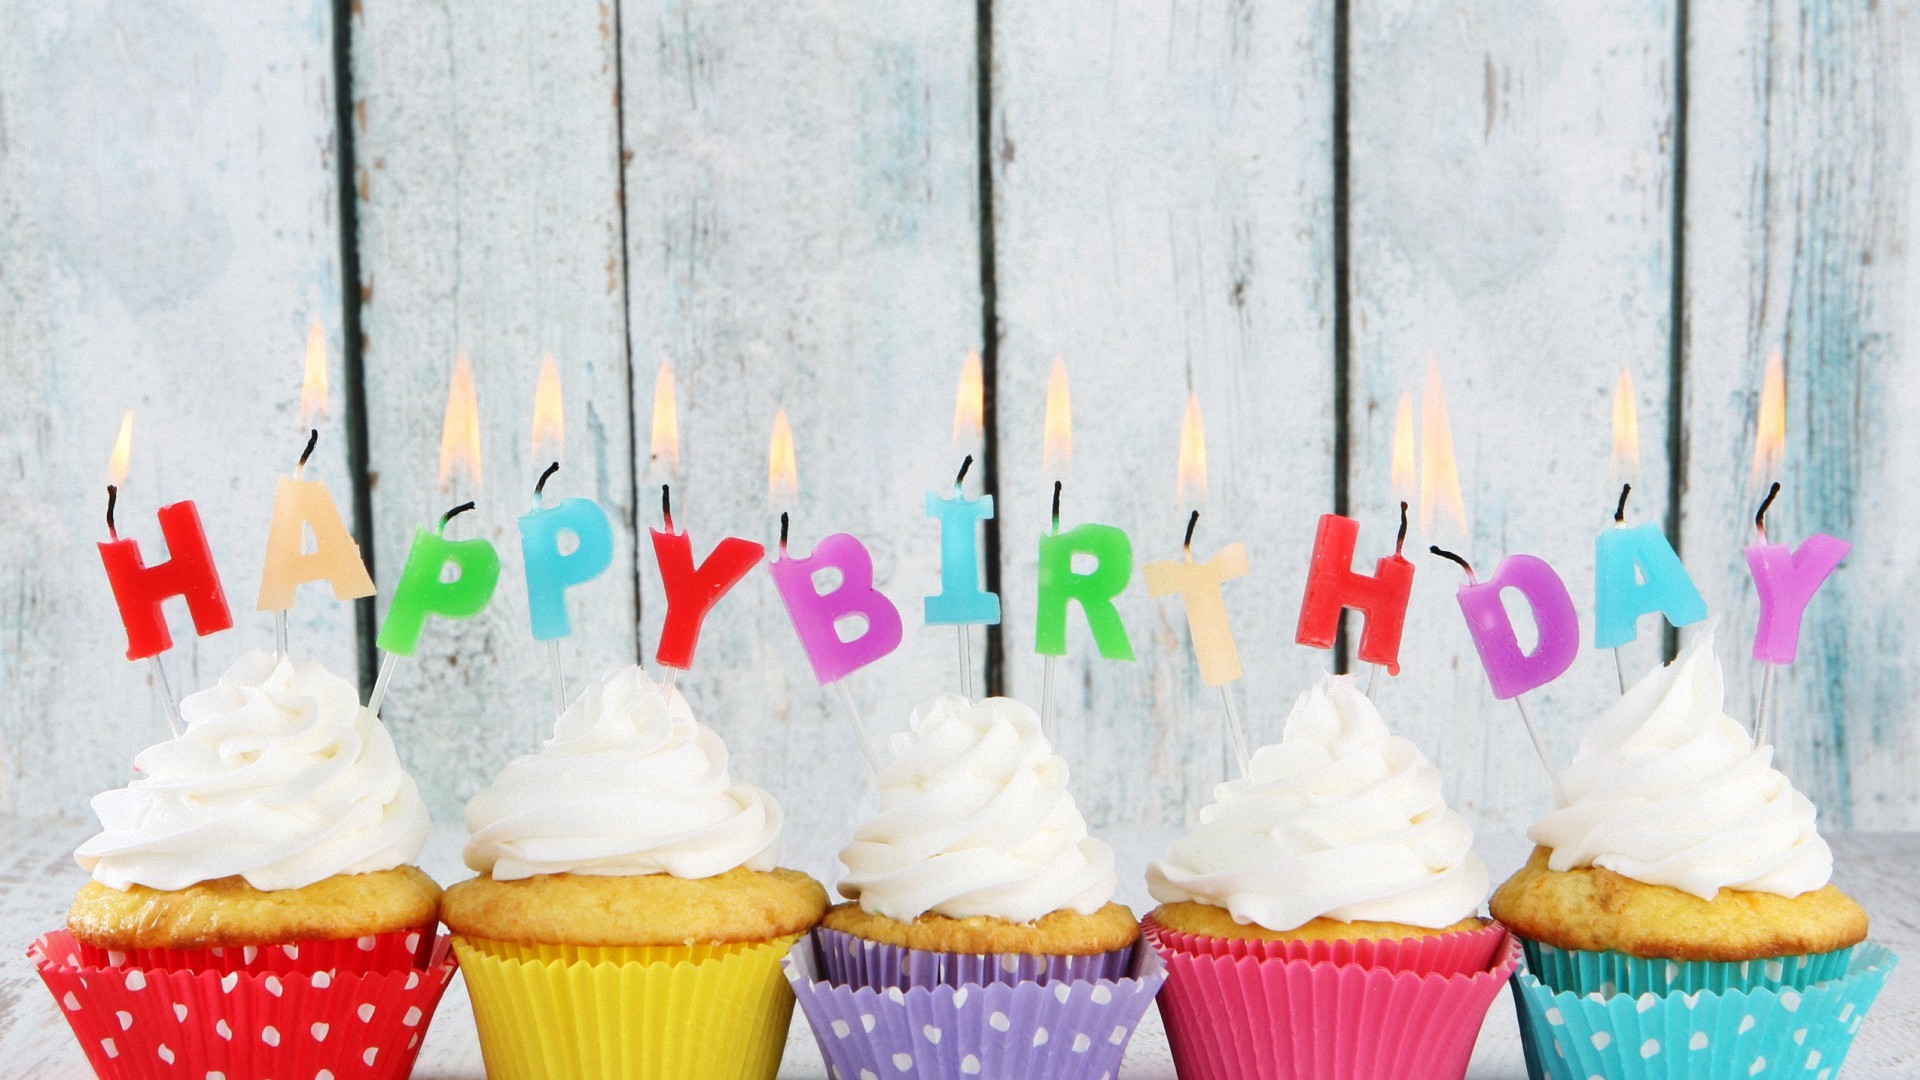 1920x1080 colorful happy birthday cake HD wallpapers - desktop backgrounds